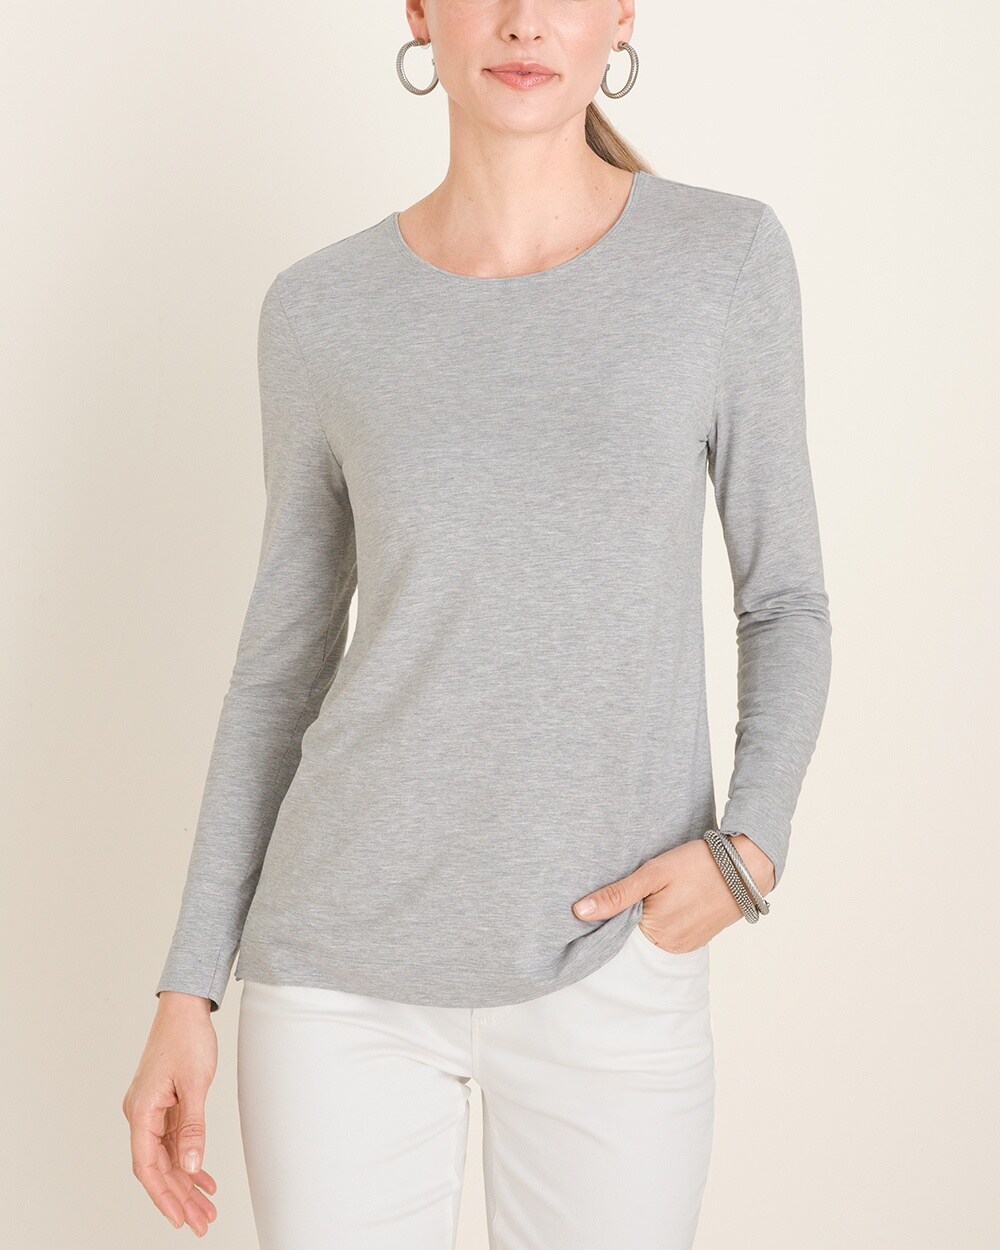 Essential Layer Top